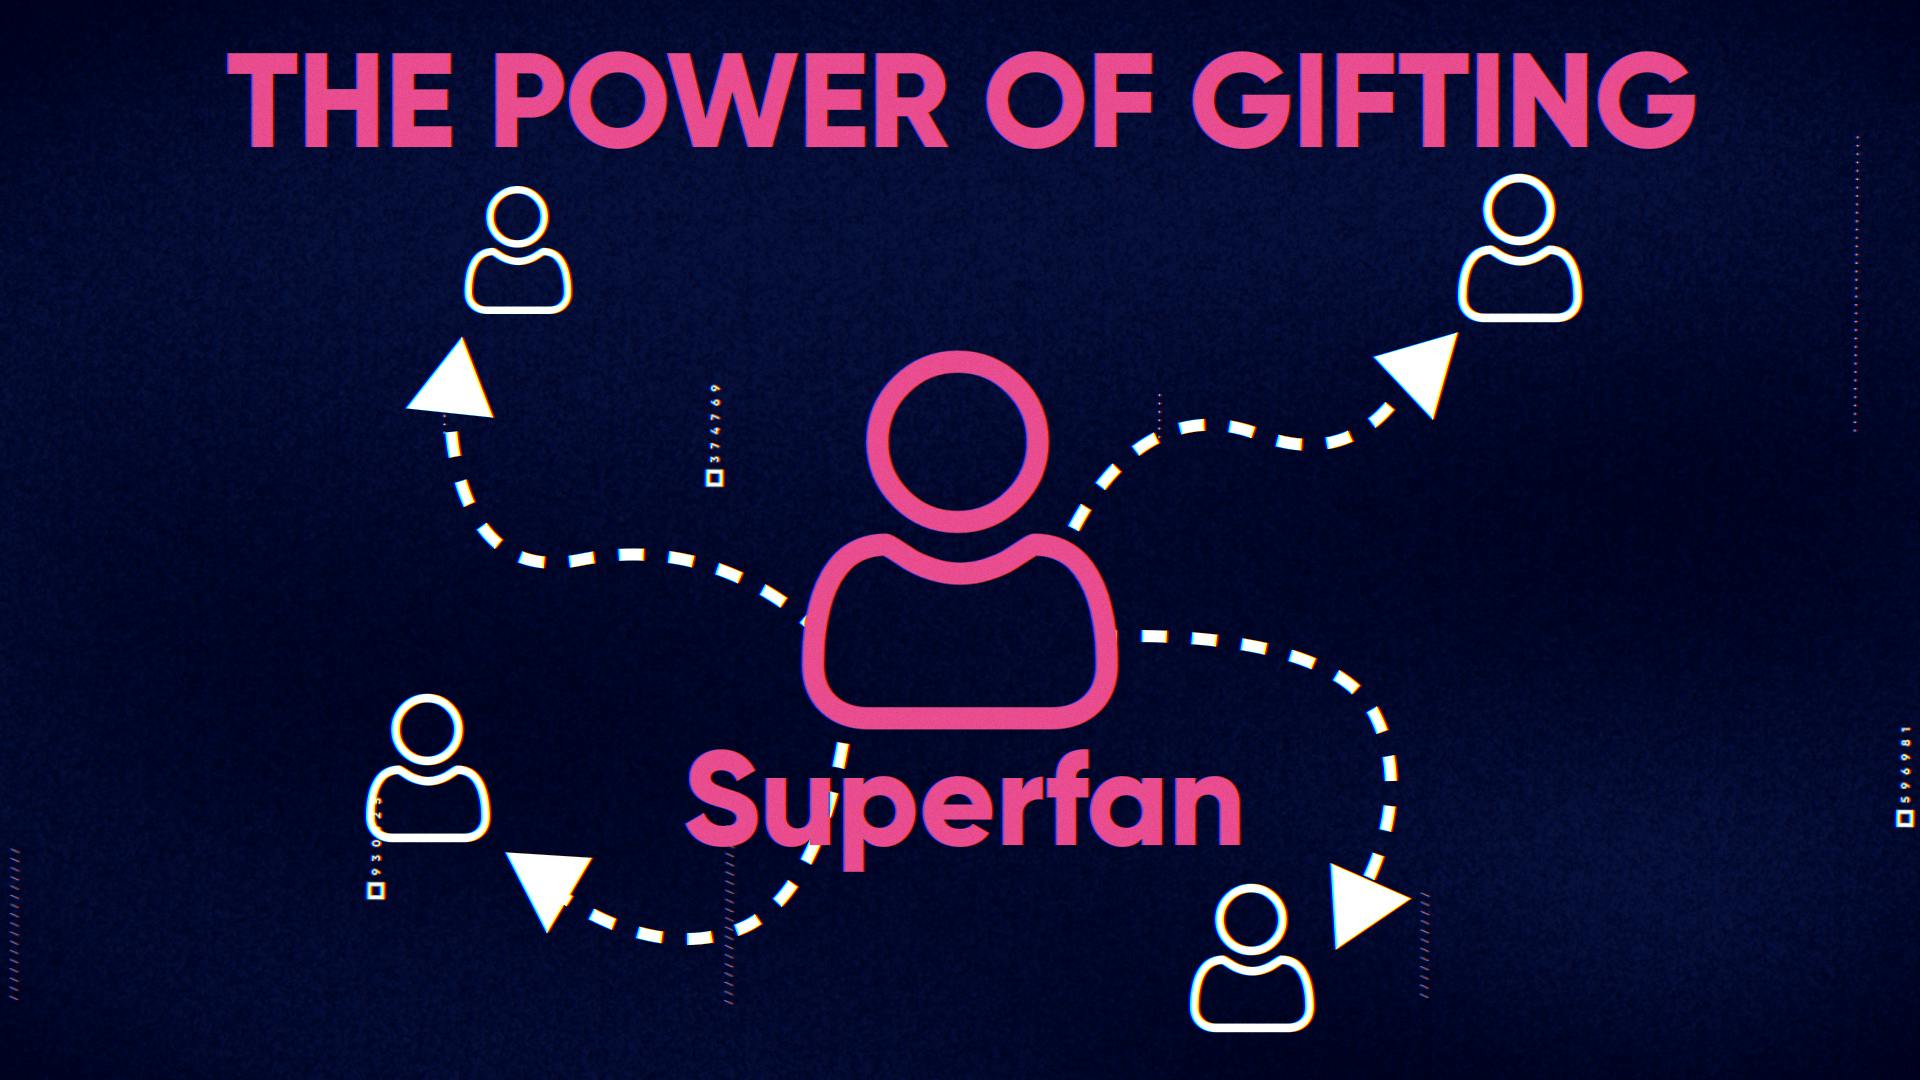 The Power of Gifting image